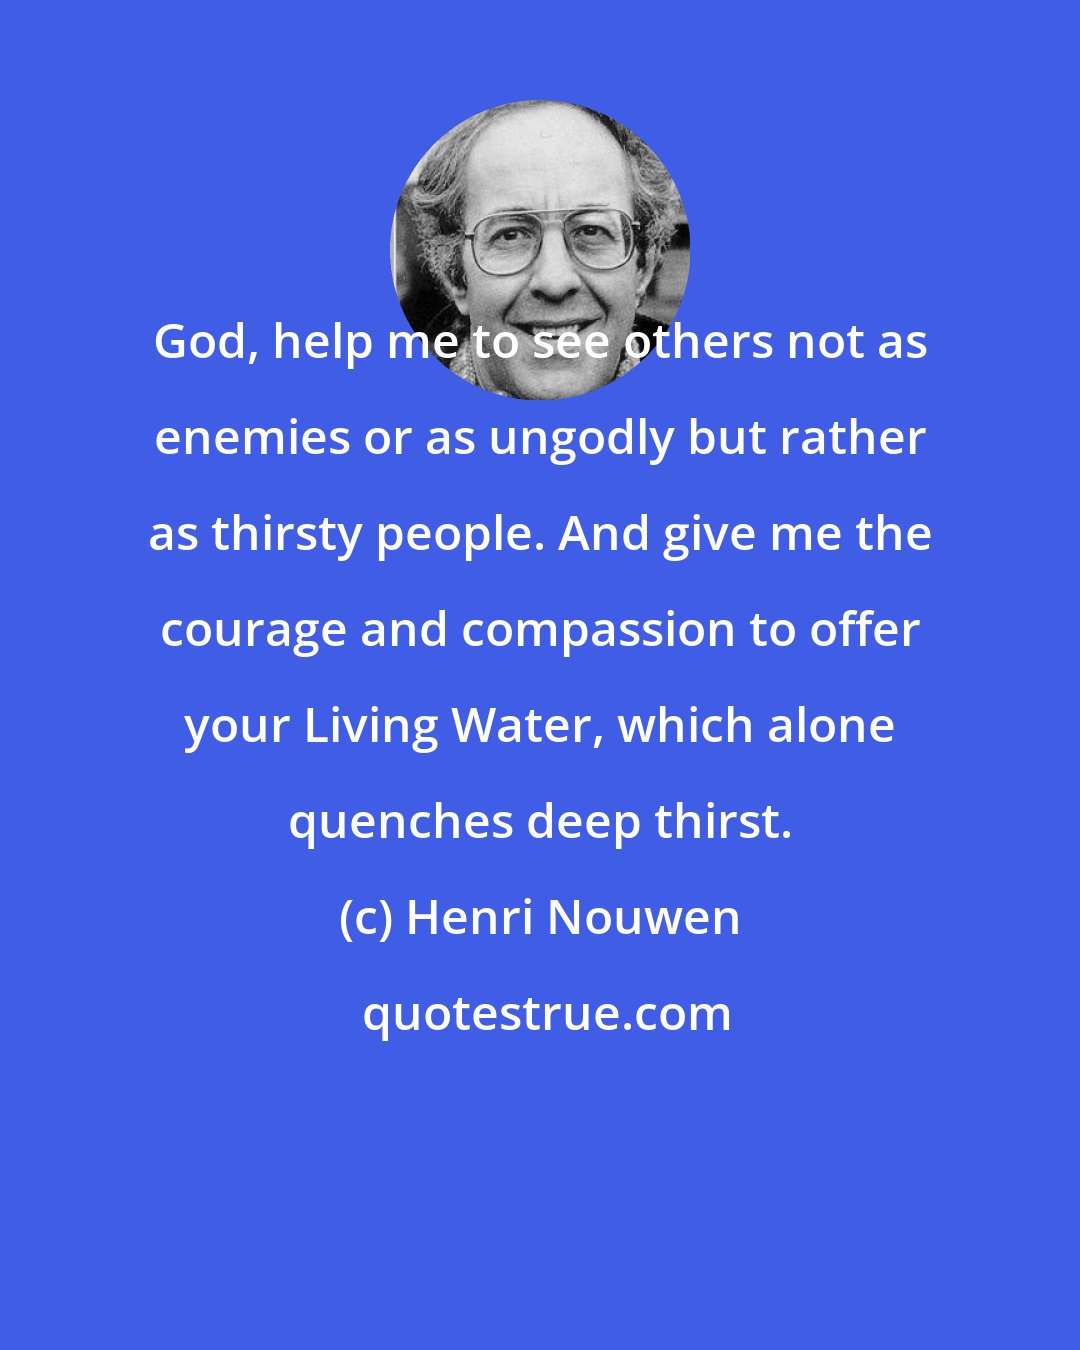 Henri Nouwen: God, help me to see others not as enemies or as ungodly but rather as thirsty people. And give me the courage and compassion to offer your Living Water, which alone quenches deep thirst.